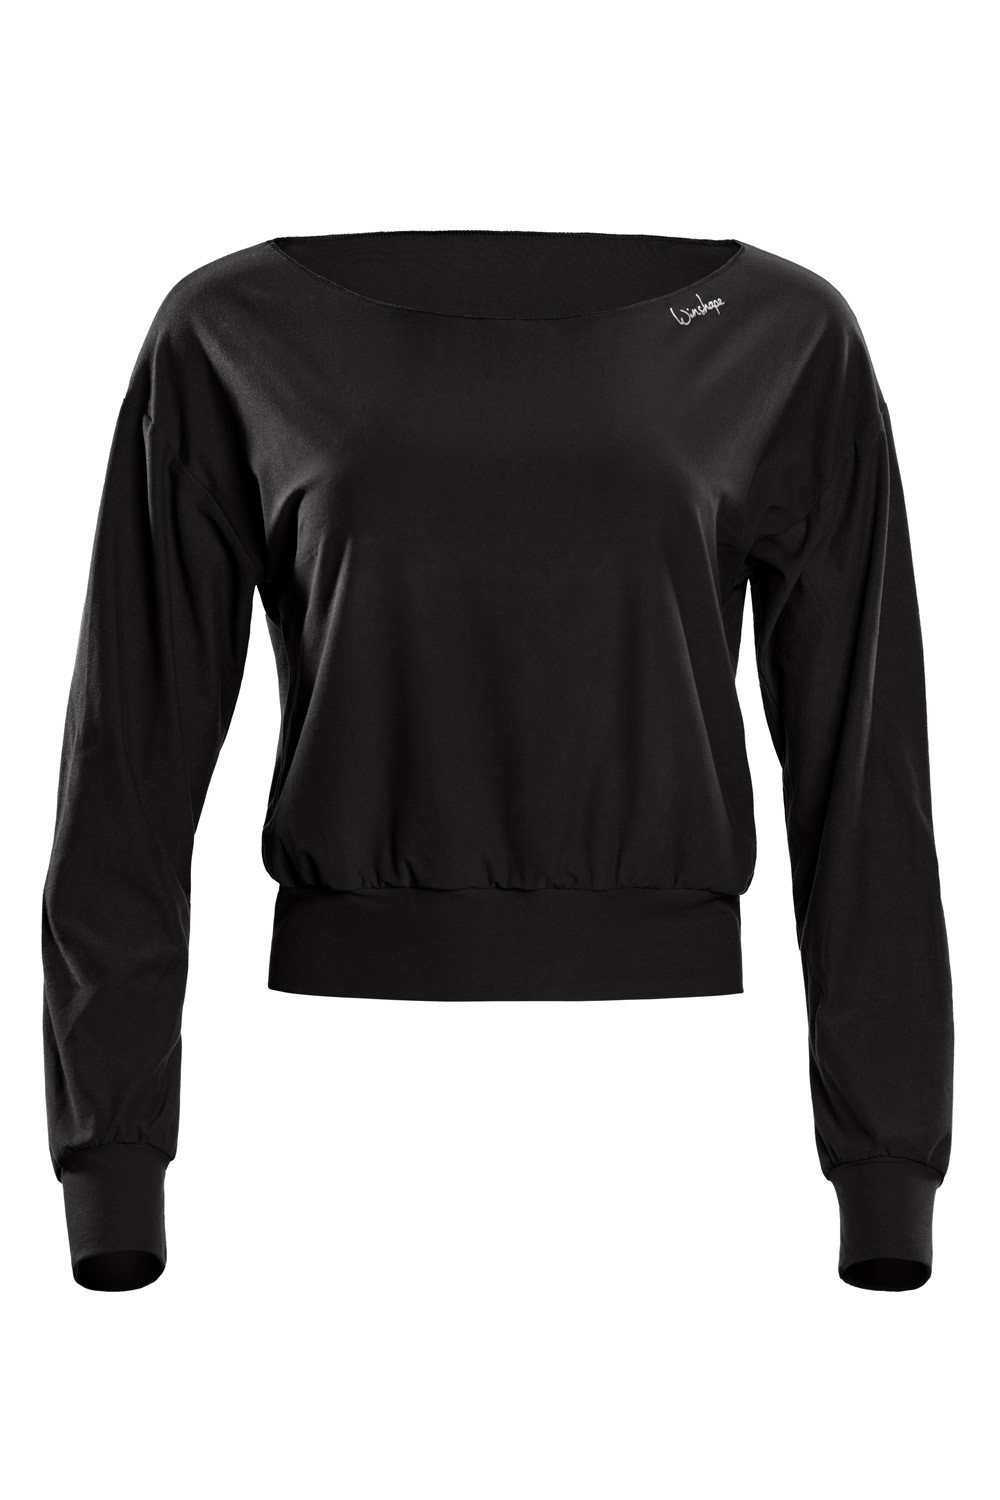 Functional Light and Soft Street LS003LS, Top Cropped schwarz, Winshape Style Long Sleeve